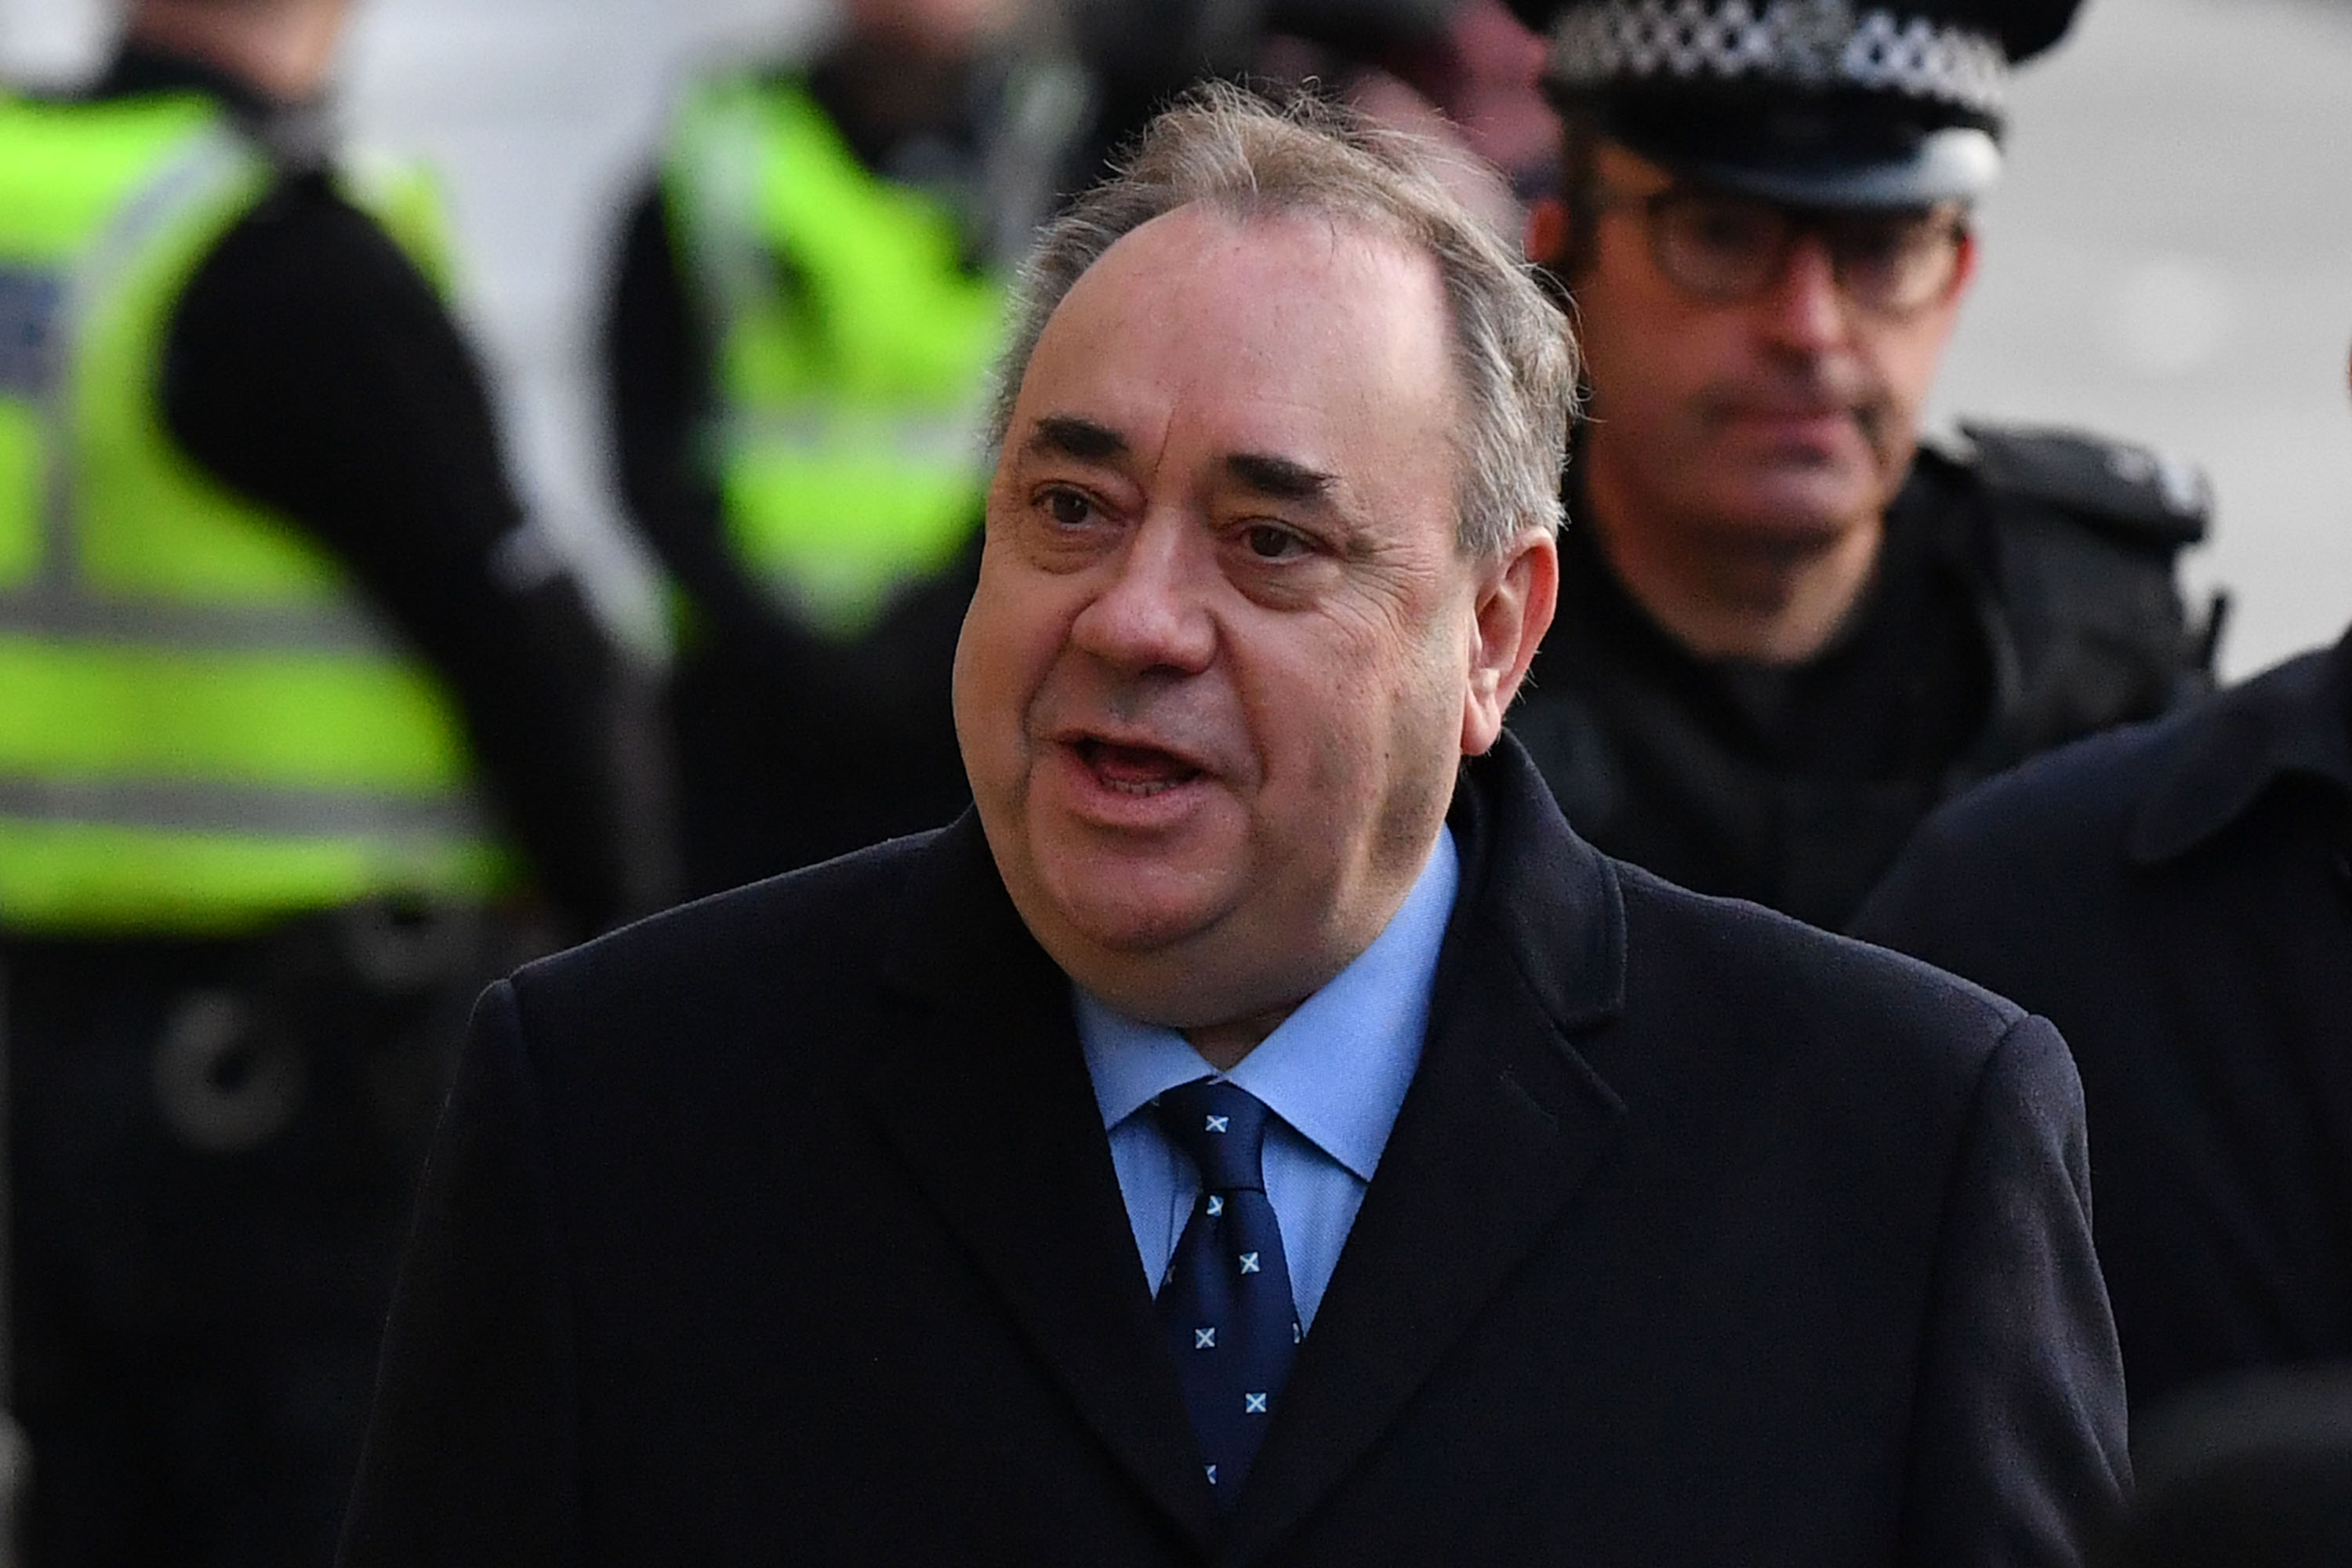 Alex Salmond arrives at the High Court in Edinburgh for a preliminary hearing on sexual assault charges.